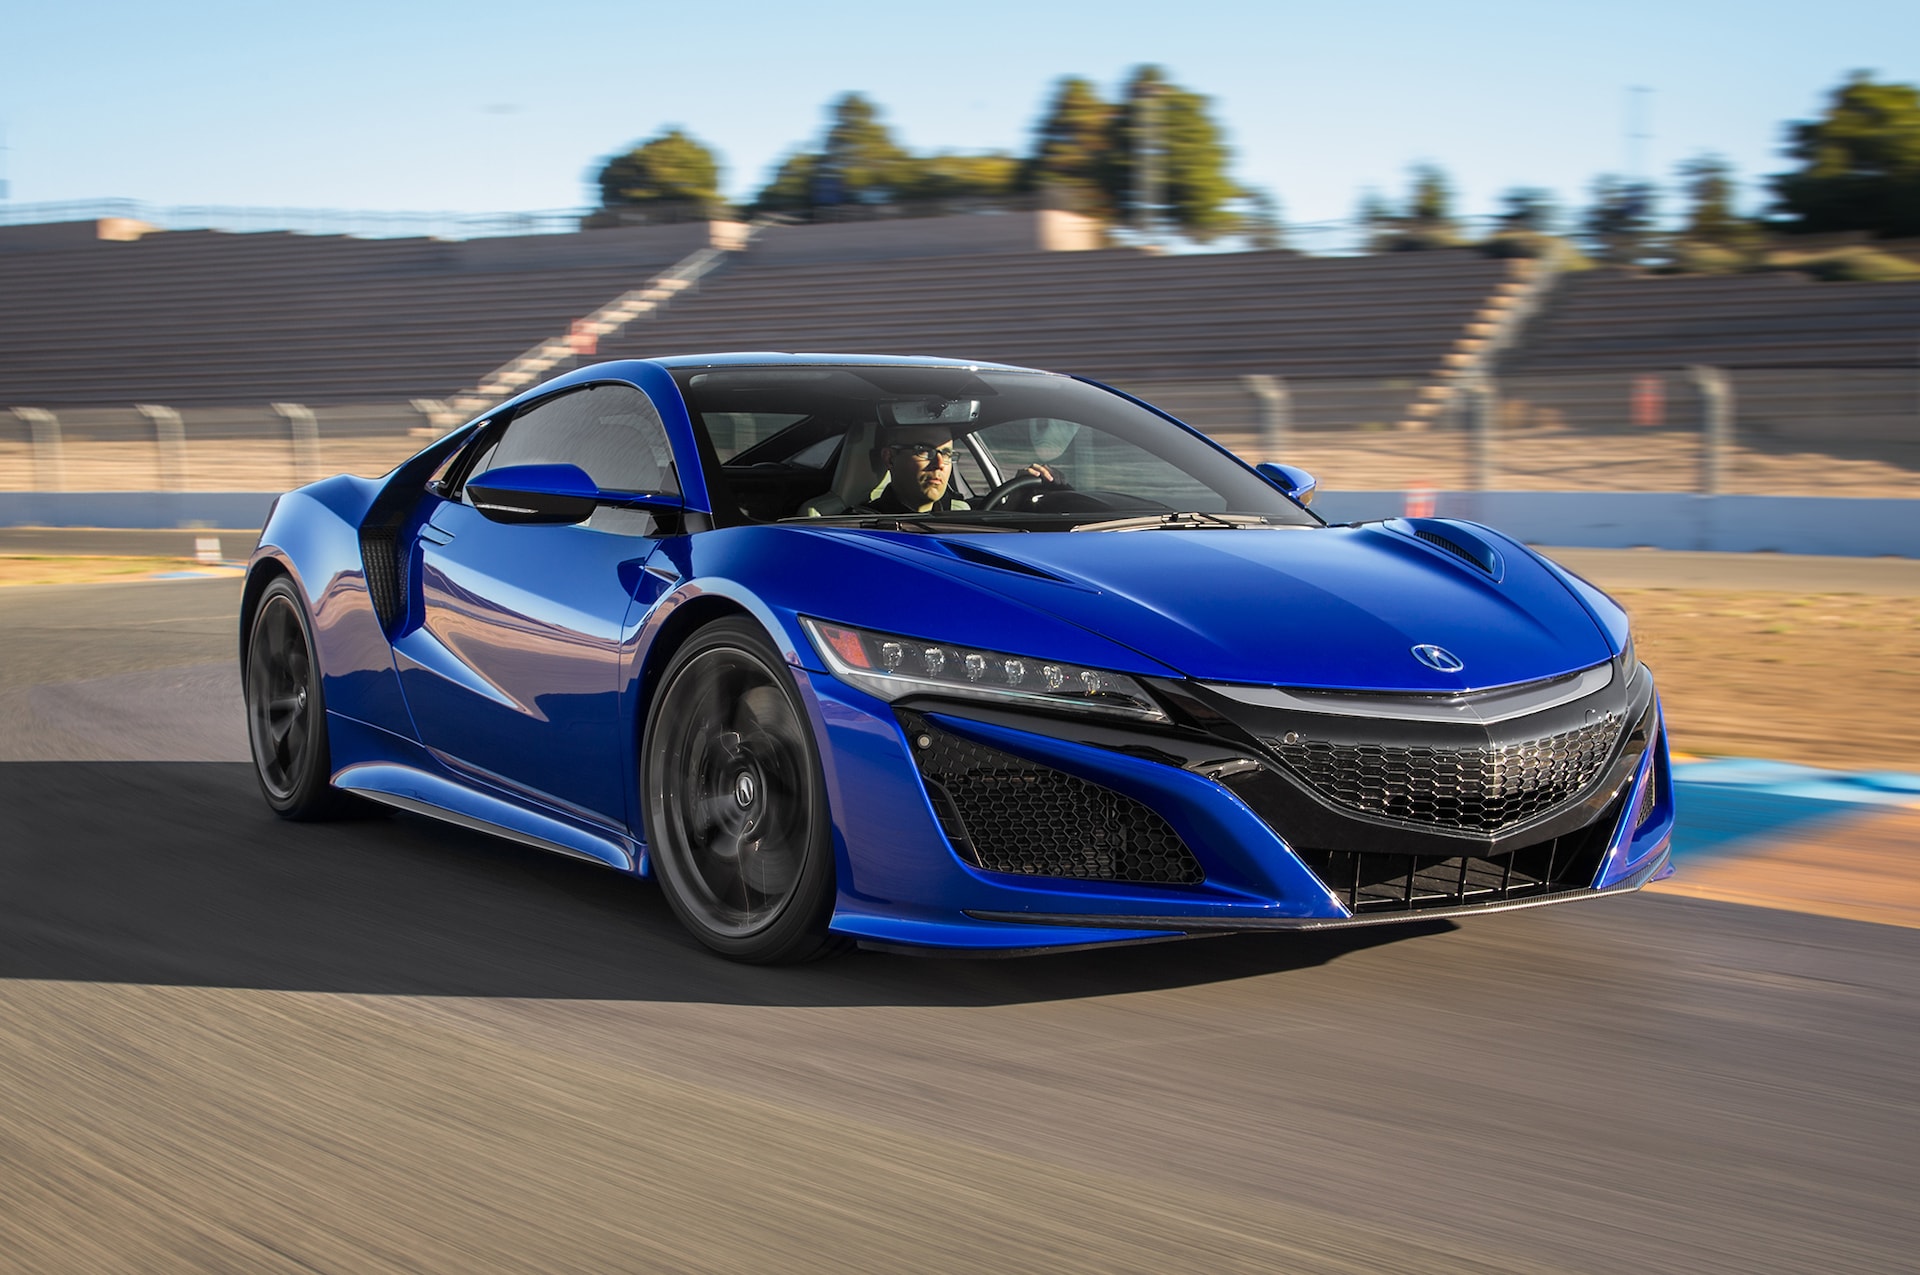 First Drive: 2017 Acura NSX